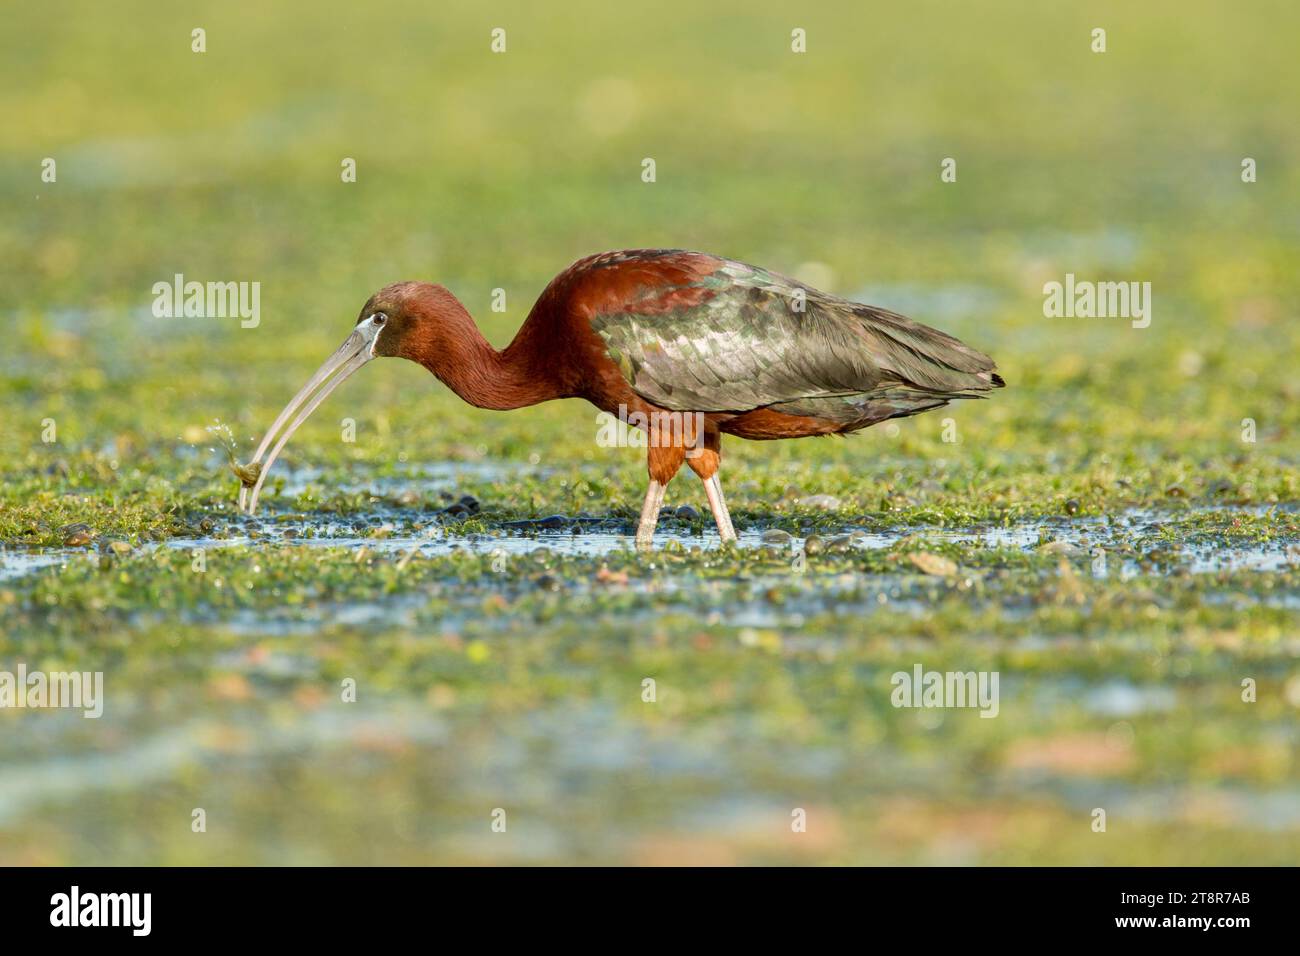 Glossy ibis (Plegadis falcinellus) foraging while standing in water and vegetation in the Danube Delta complex of lagoons Stock Photo